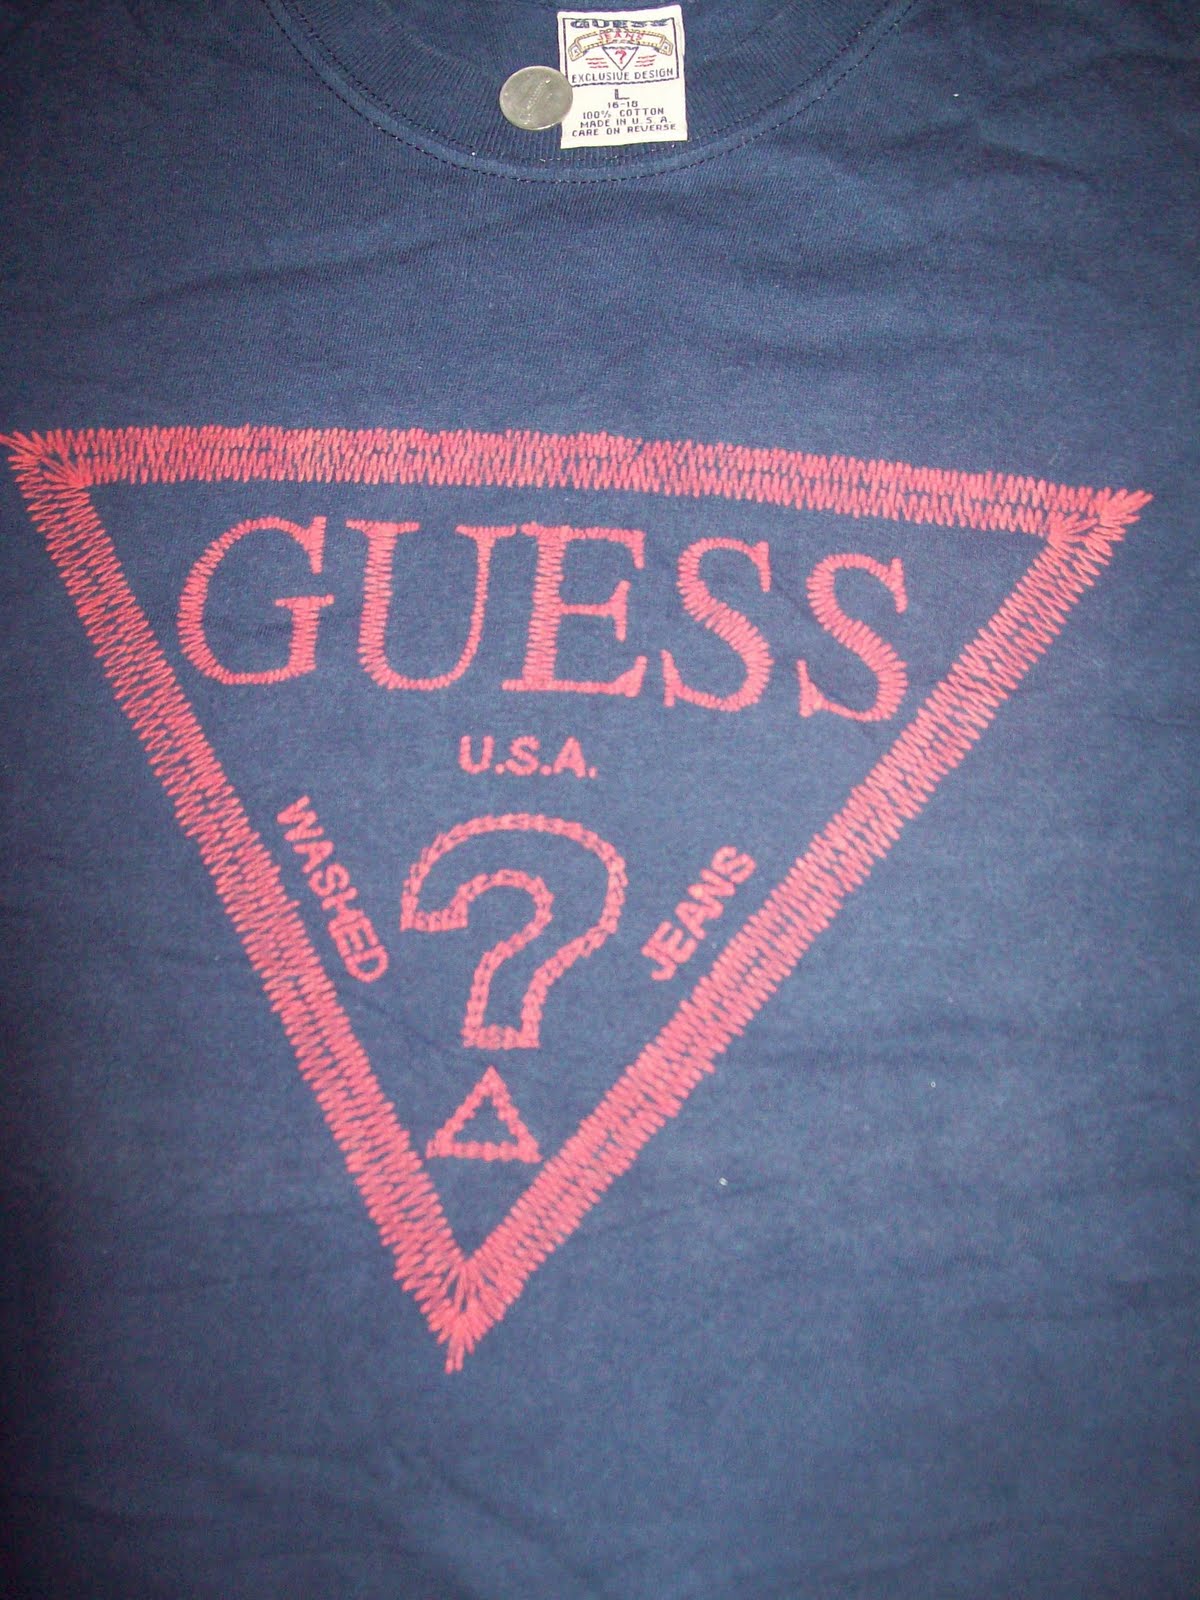 NEW OLD STUFF: GUESS JEANS T-SHIRT